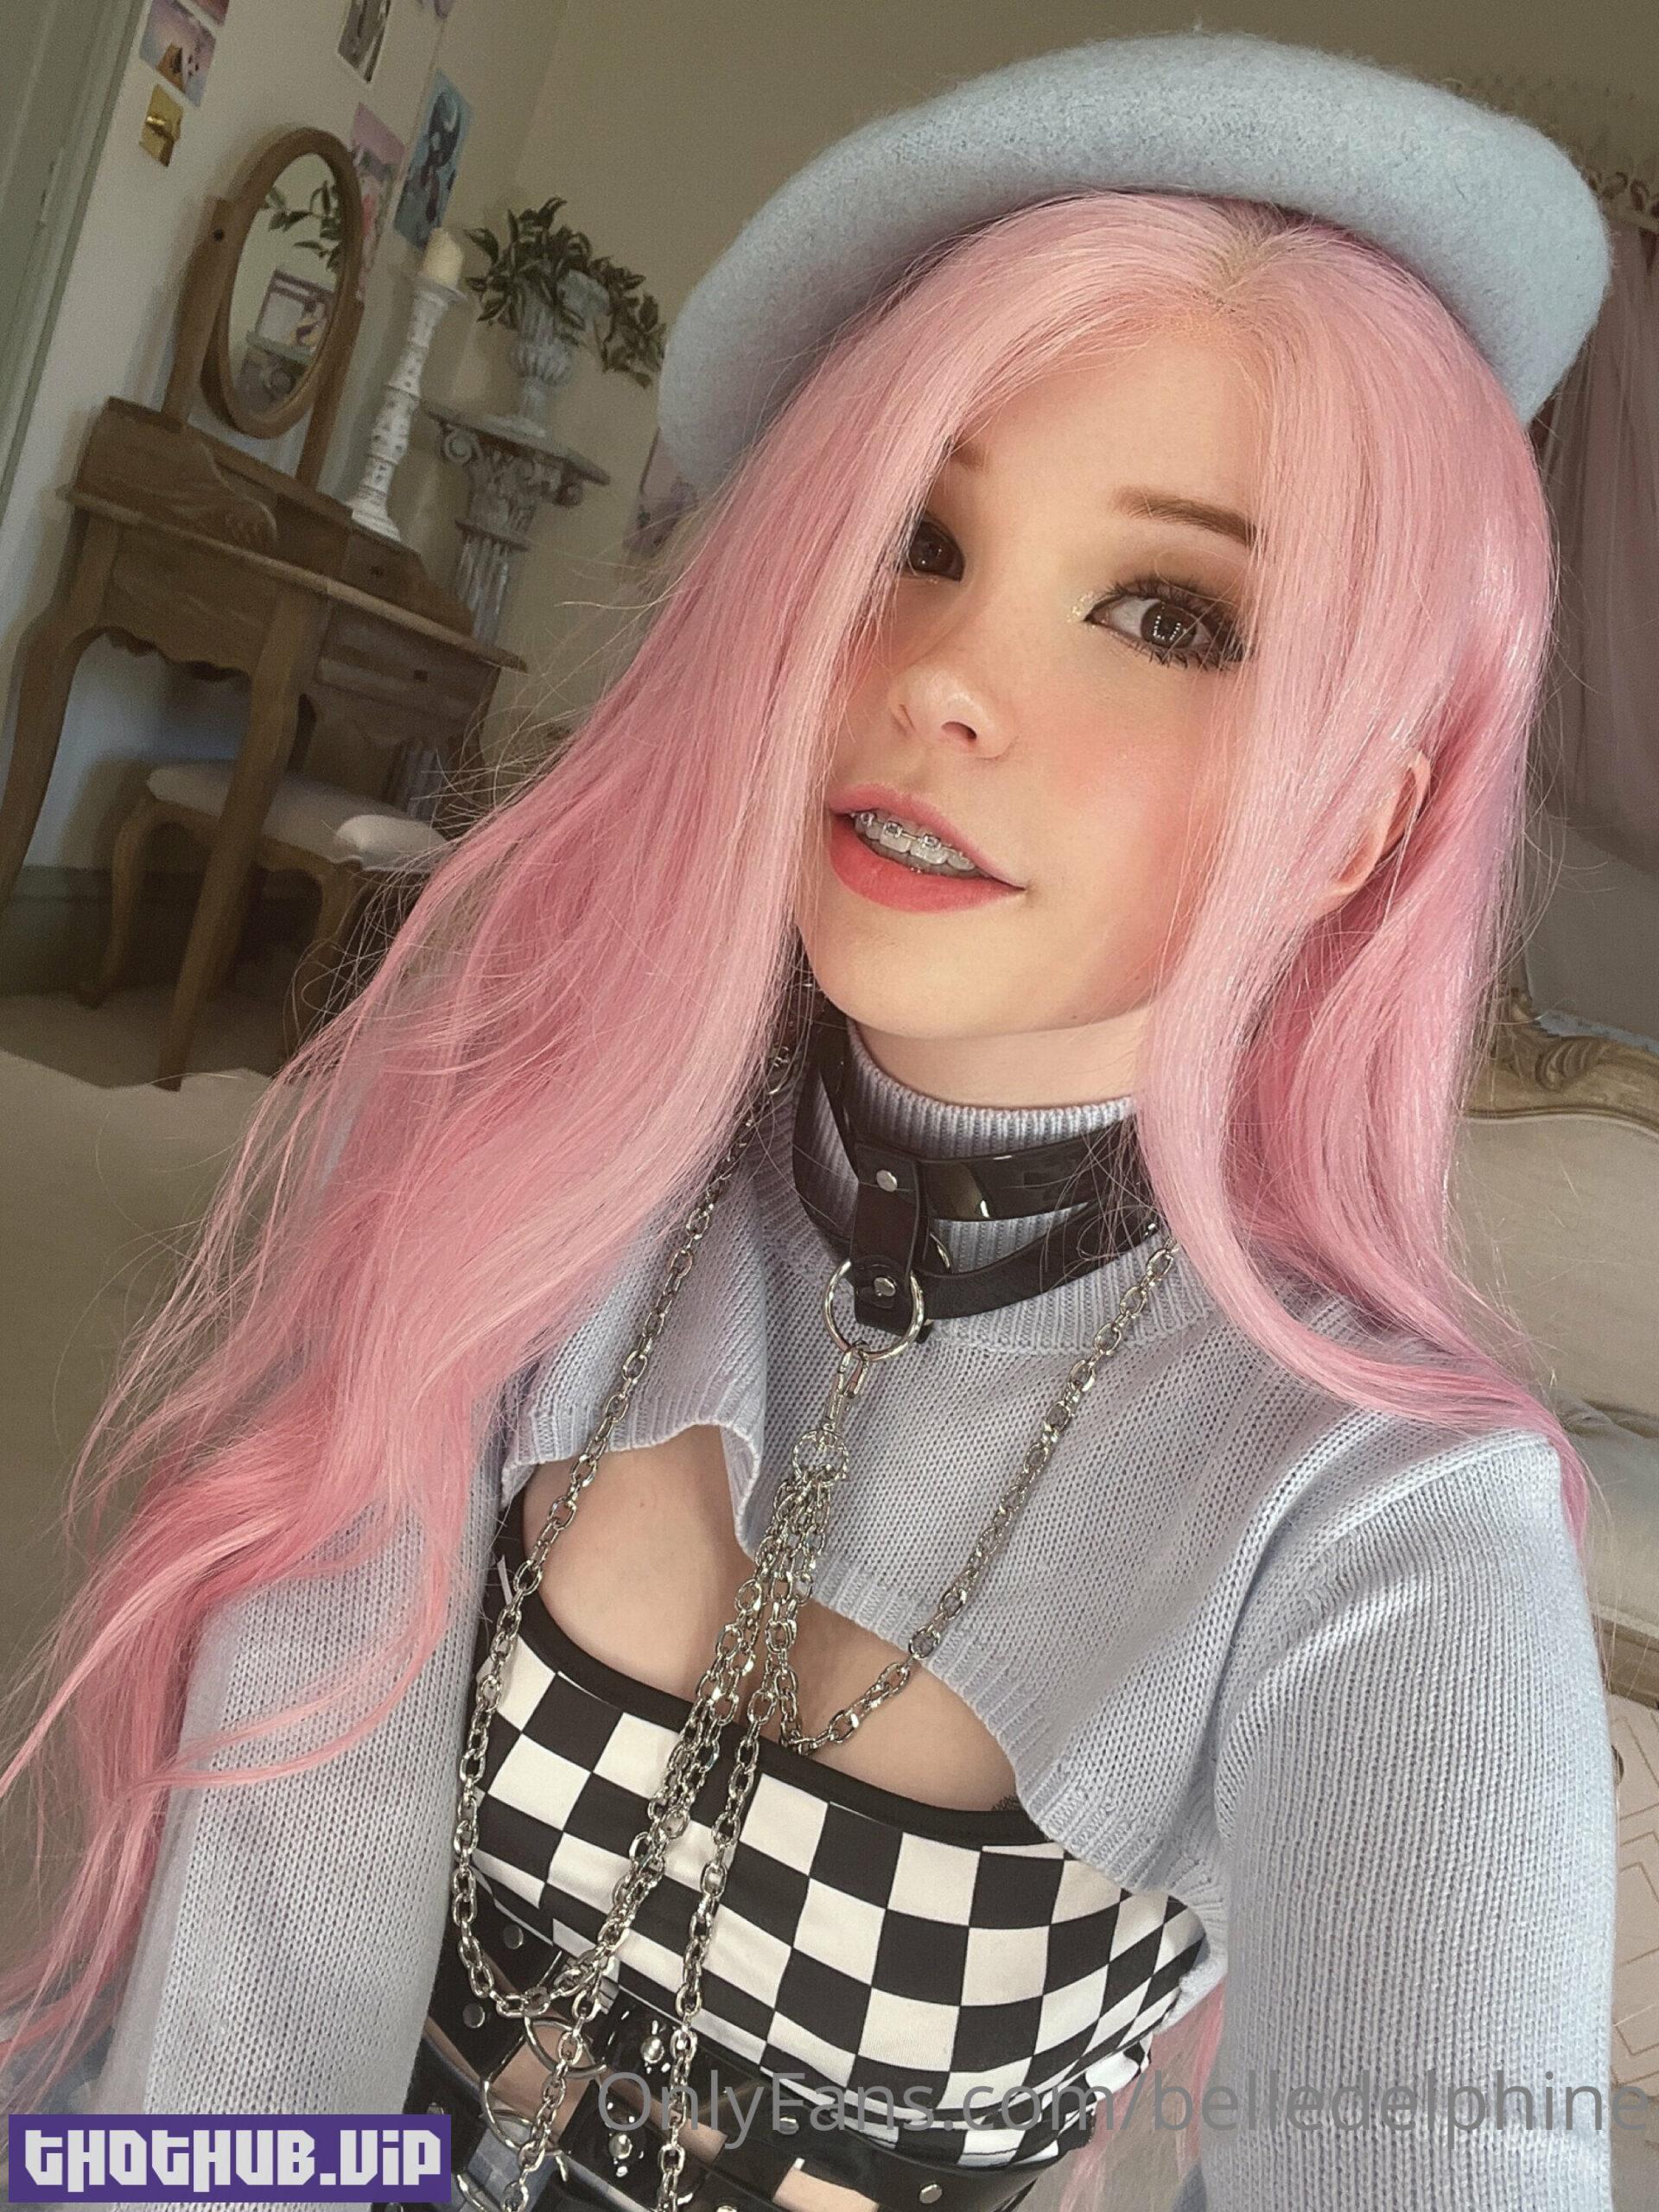 Top Naked Belle Delphine Nude Cafe Cosplay Porn 2022